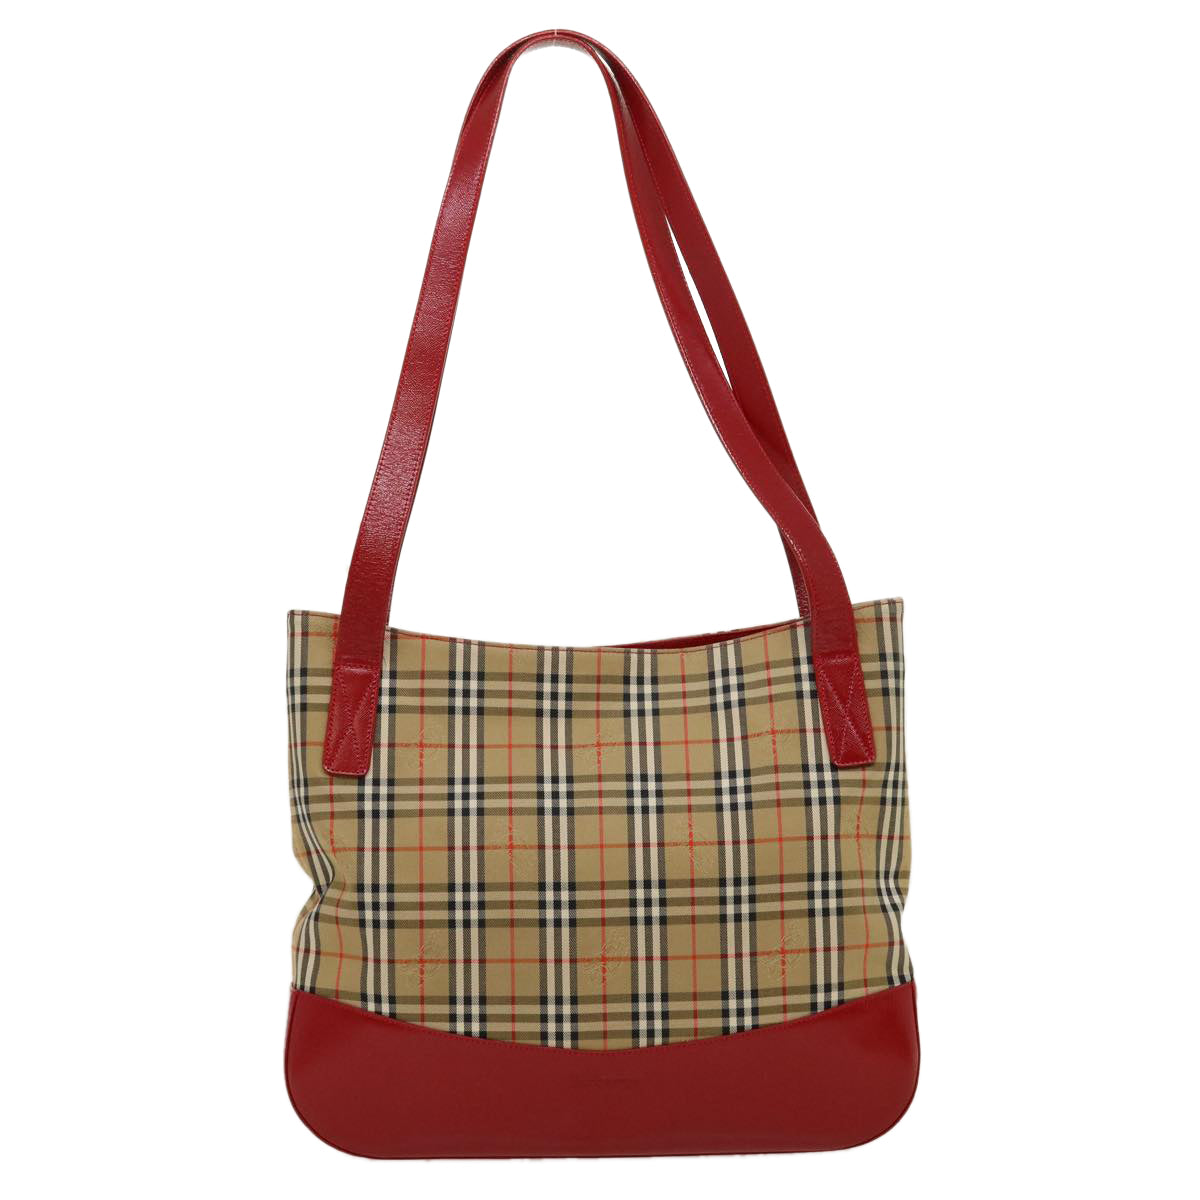 Burberrys Nova Check Tote Bag Canvas Leather Beige Red Auth rd2124